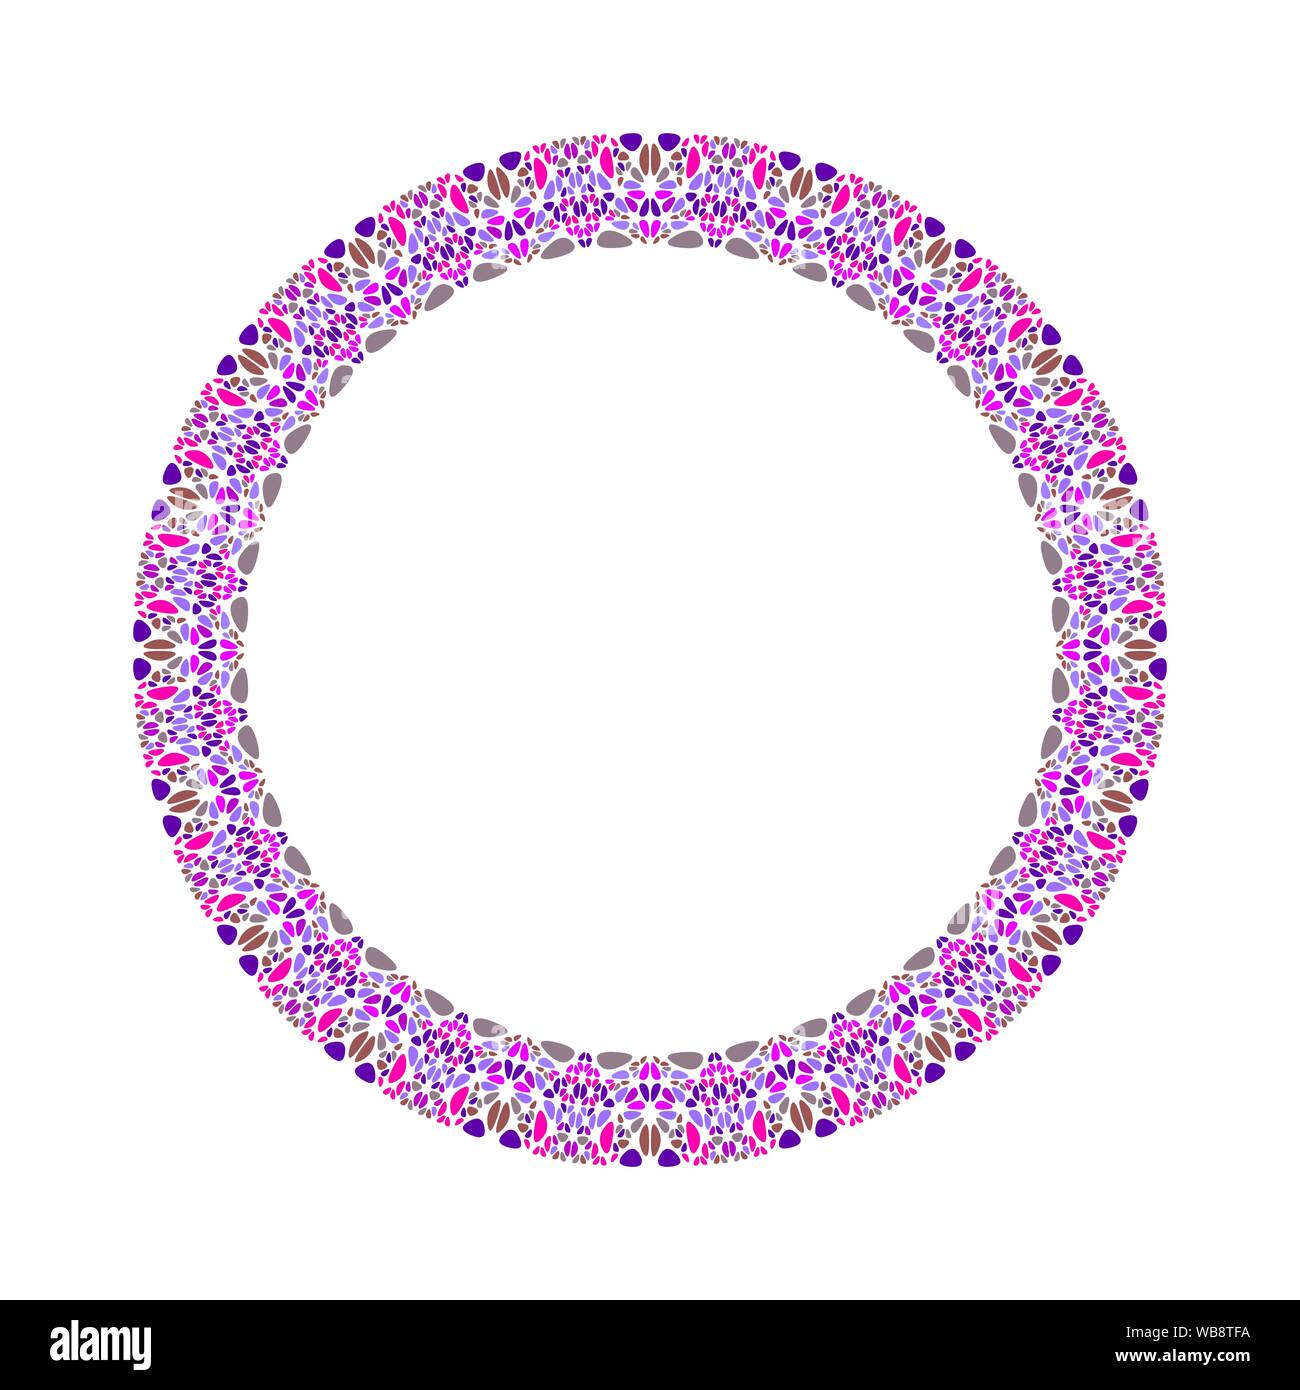 Mosaic circular border - abstract round vector design element on white background Stock Vector